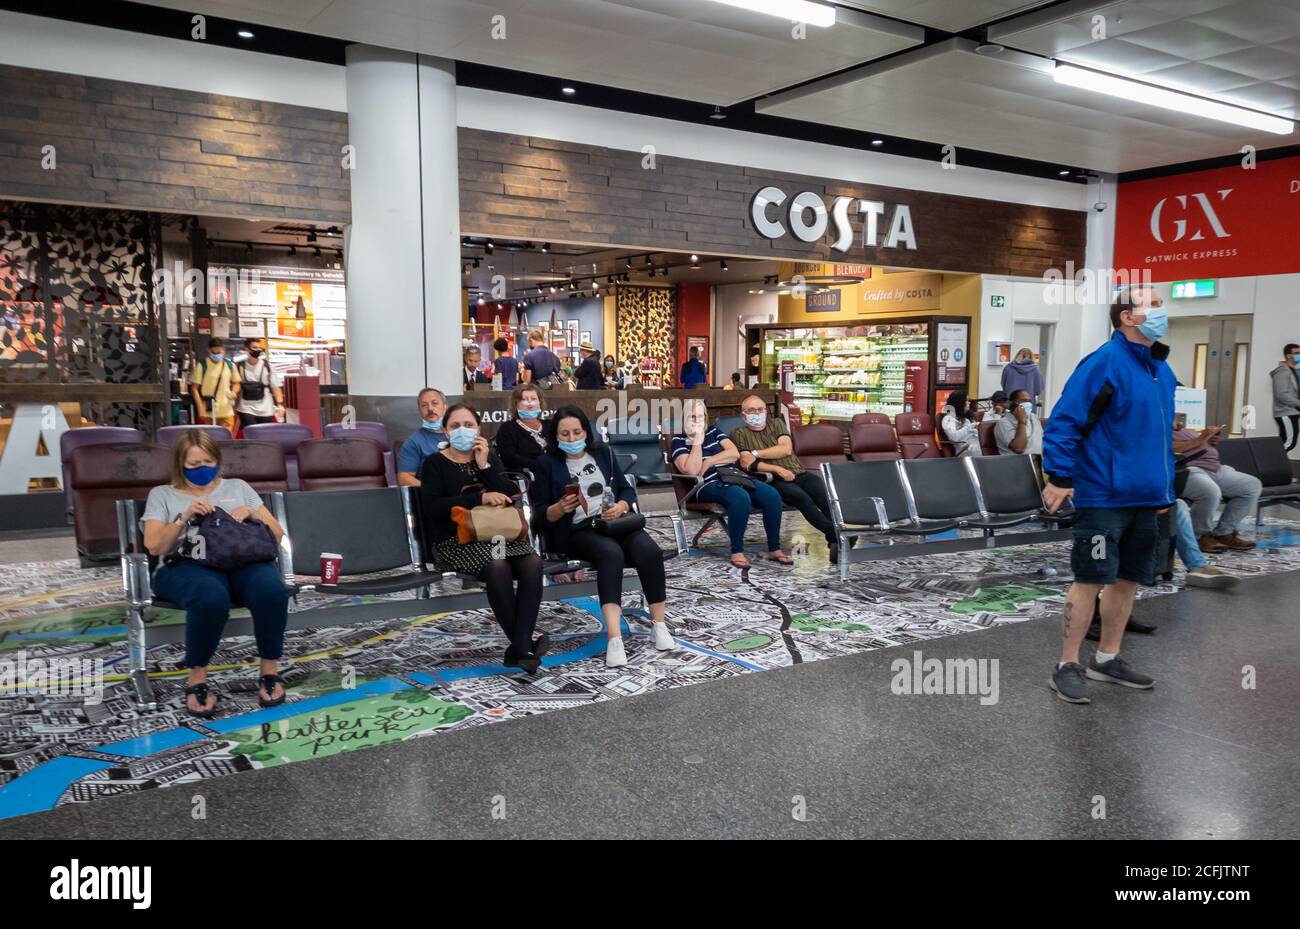 A branch of Costa Coffee in the arrivals lounge of Gatwick airport. Stock Photo